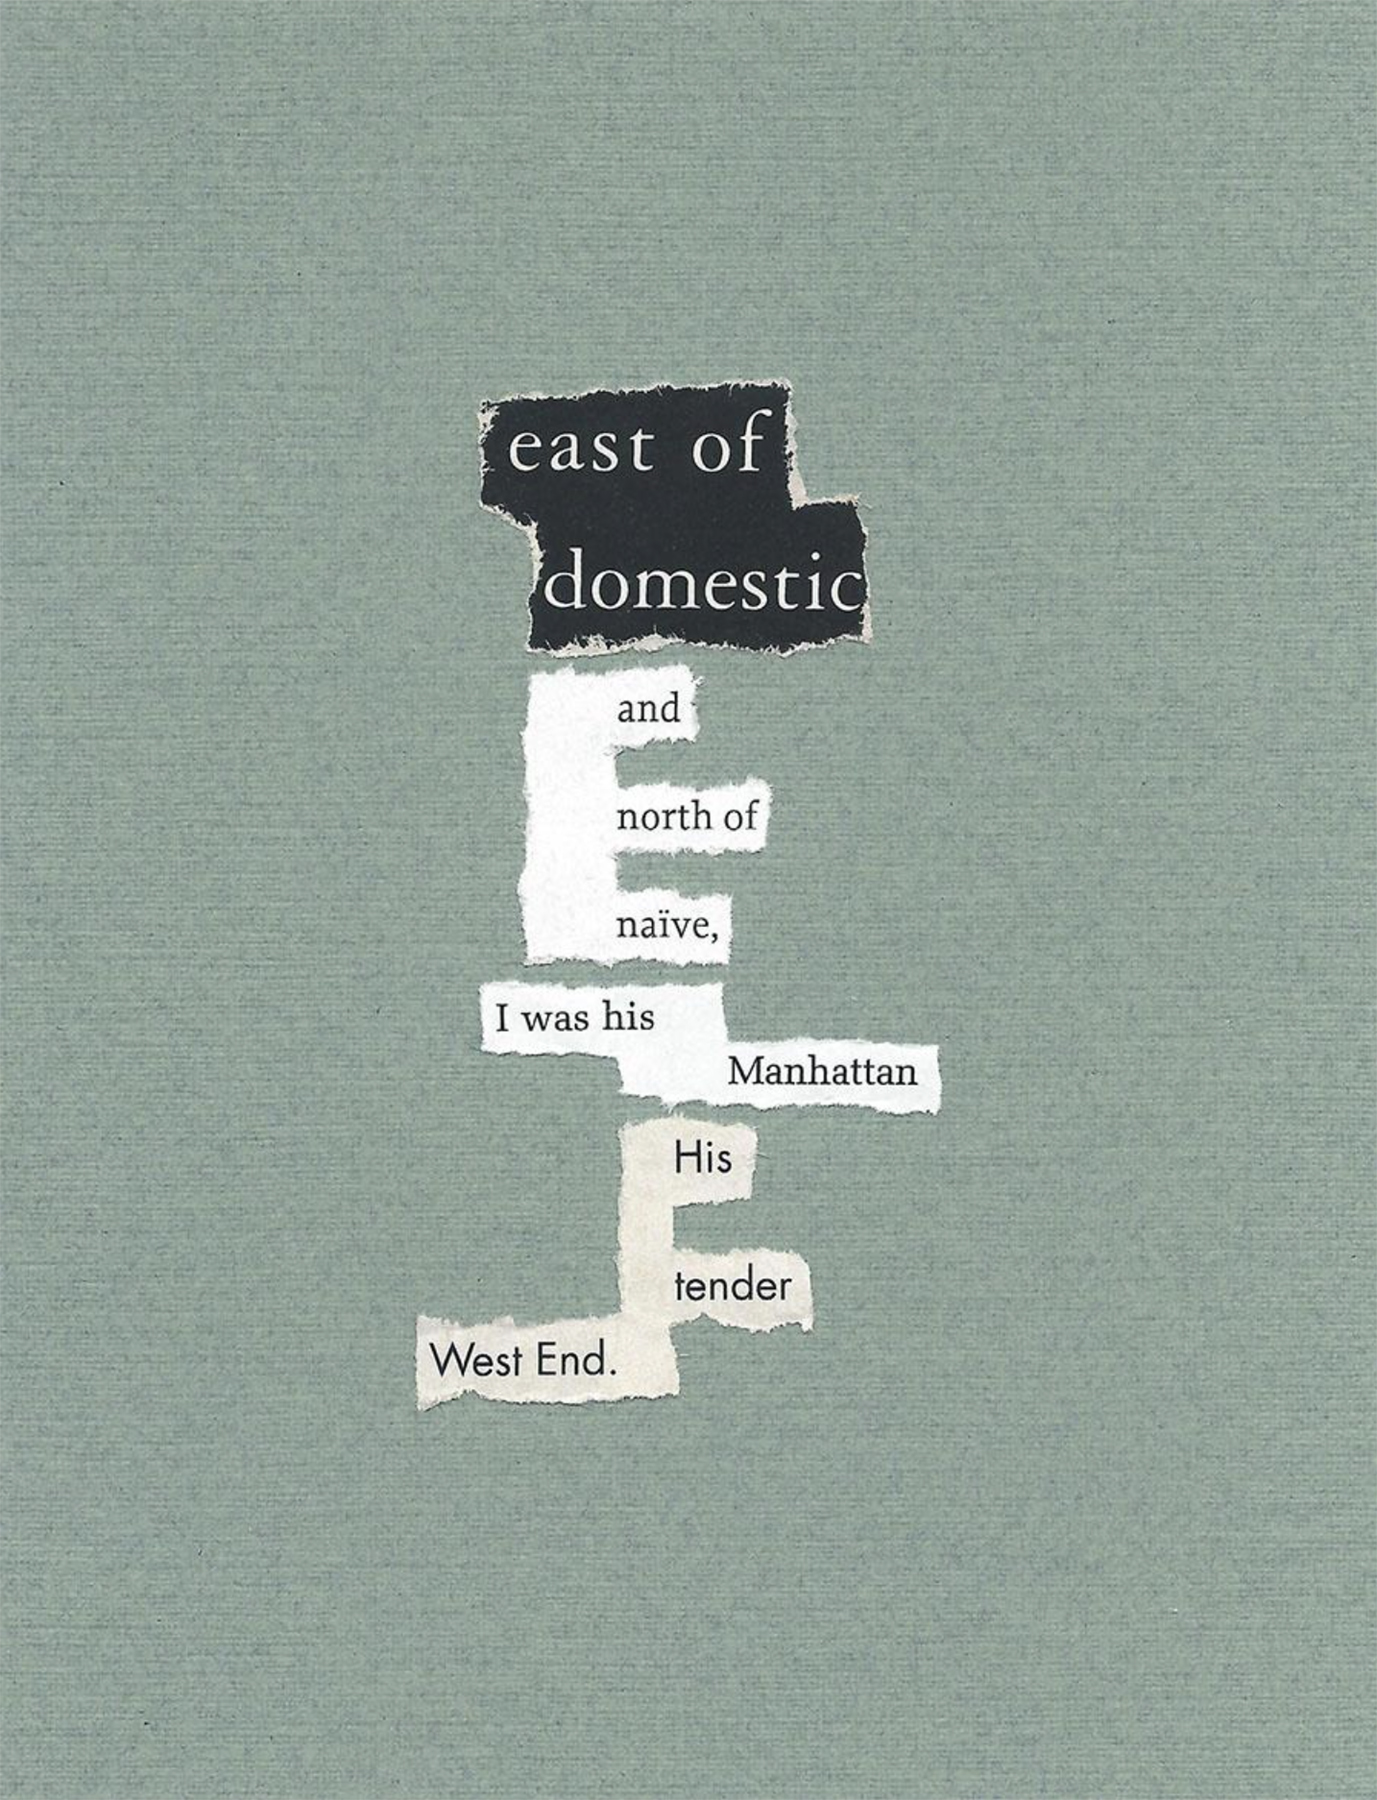 Collage of cutout words creating the poem East of Domestic | courtesy of J I Kleinberg